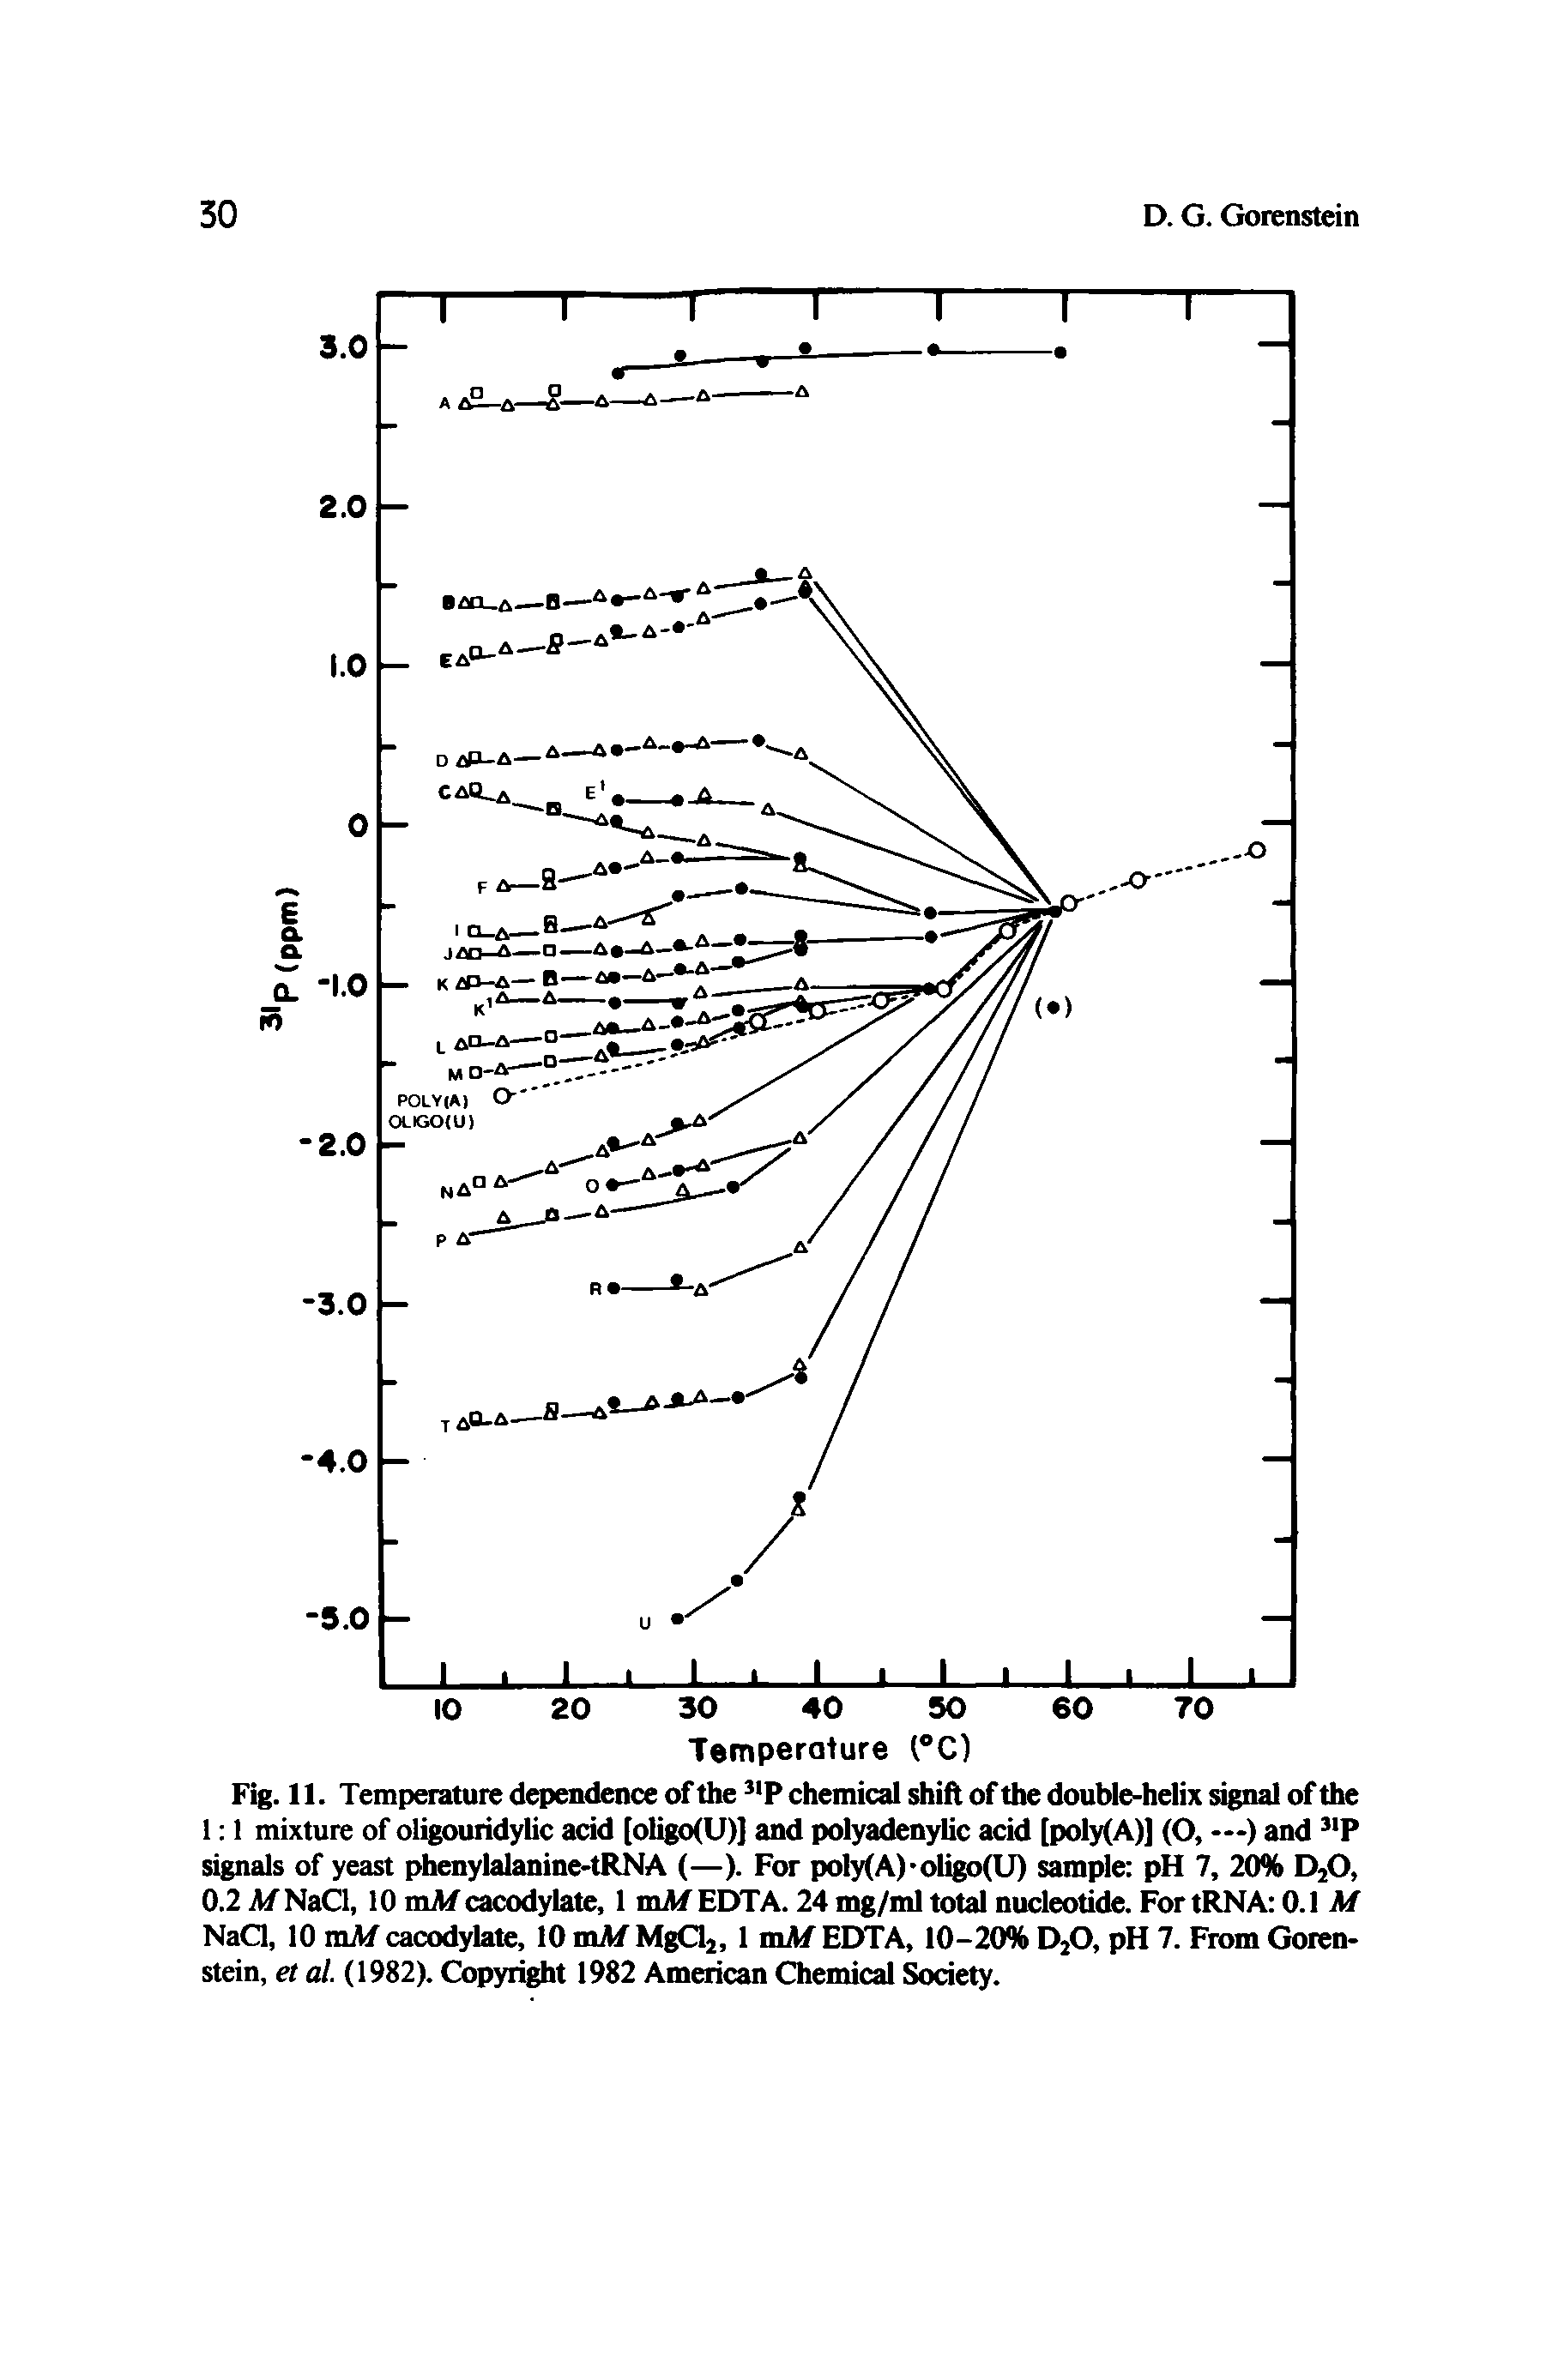 Fig. 11. Temperature dependence of the P chemical shift of the double-helix signal of the 1 1 mixture of oligouiidylic acid [oIigo(U)] and polyadenylic add (poly(A)] (O, —) and P signals of yeast phenylalanine-tRNA (—). For poly(A) oligo(U) sample pH 7, 20% D2O, 0.2 NaCl, 10 mMcacodylate, 1 mil/EDTA. 24 mg/ml total nucleotide. For tRNA 0.1 M NaQ, 10 mM cacodylate, 10 mMMgQ2,1 mAf EDTA, 10-20% D2O, pH 7. From Gorenstein, et al. (1982). Copyright 1982 American Chemical Sodety.